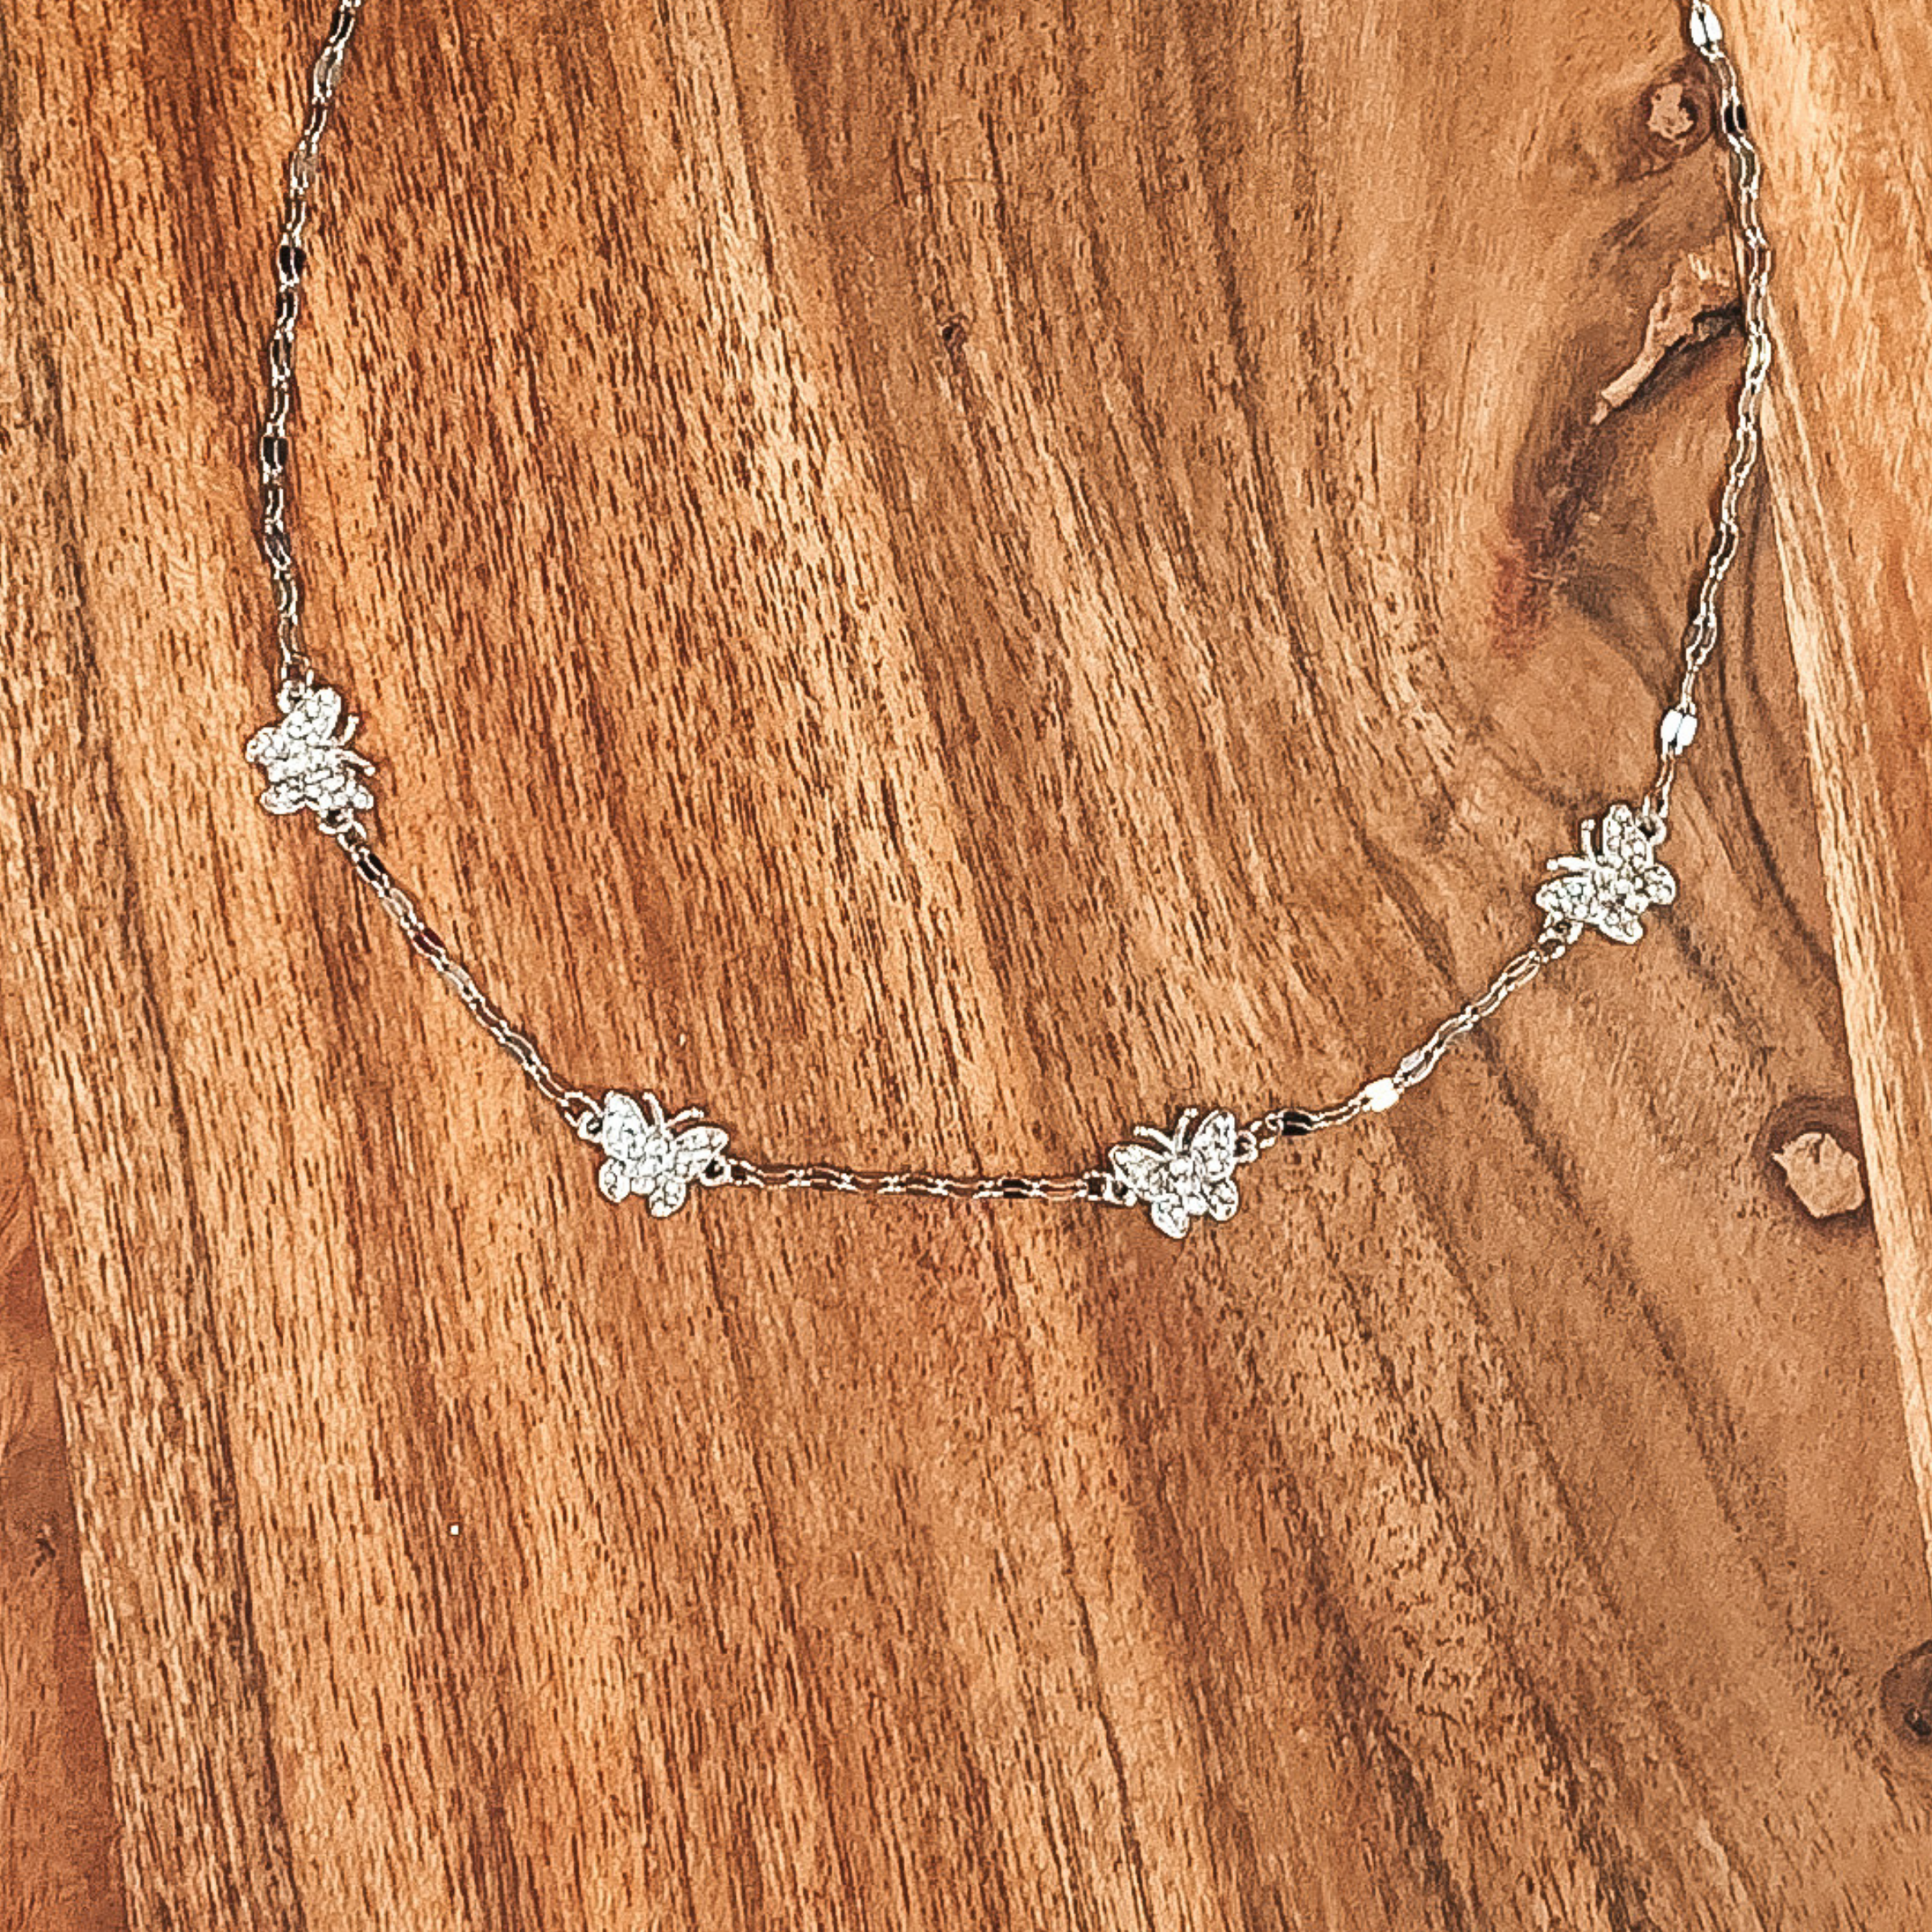 Float Like a Butterfly Crystal Pendant Necklace in Silver - Giddy Up Glamour Boutique